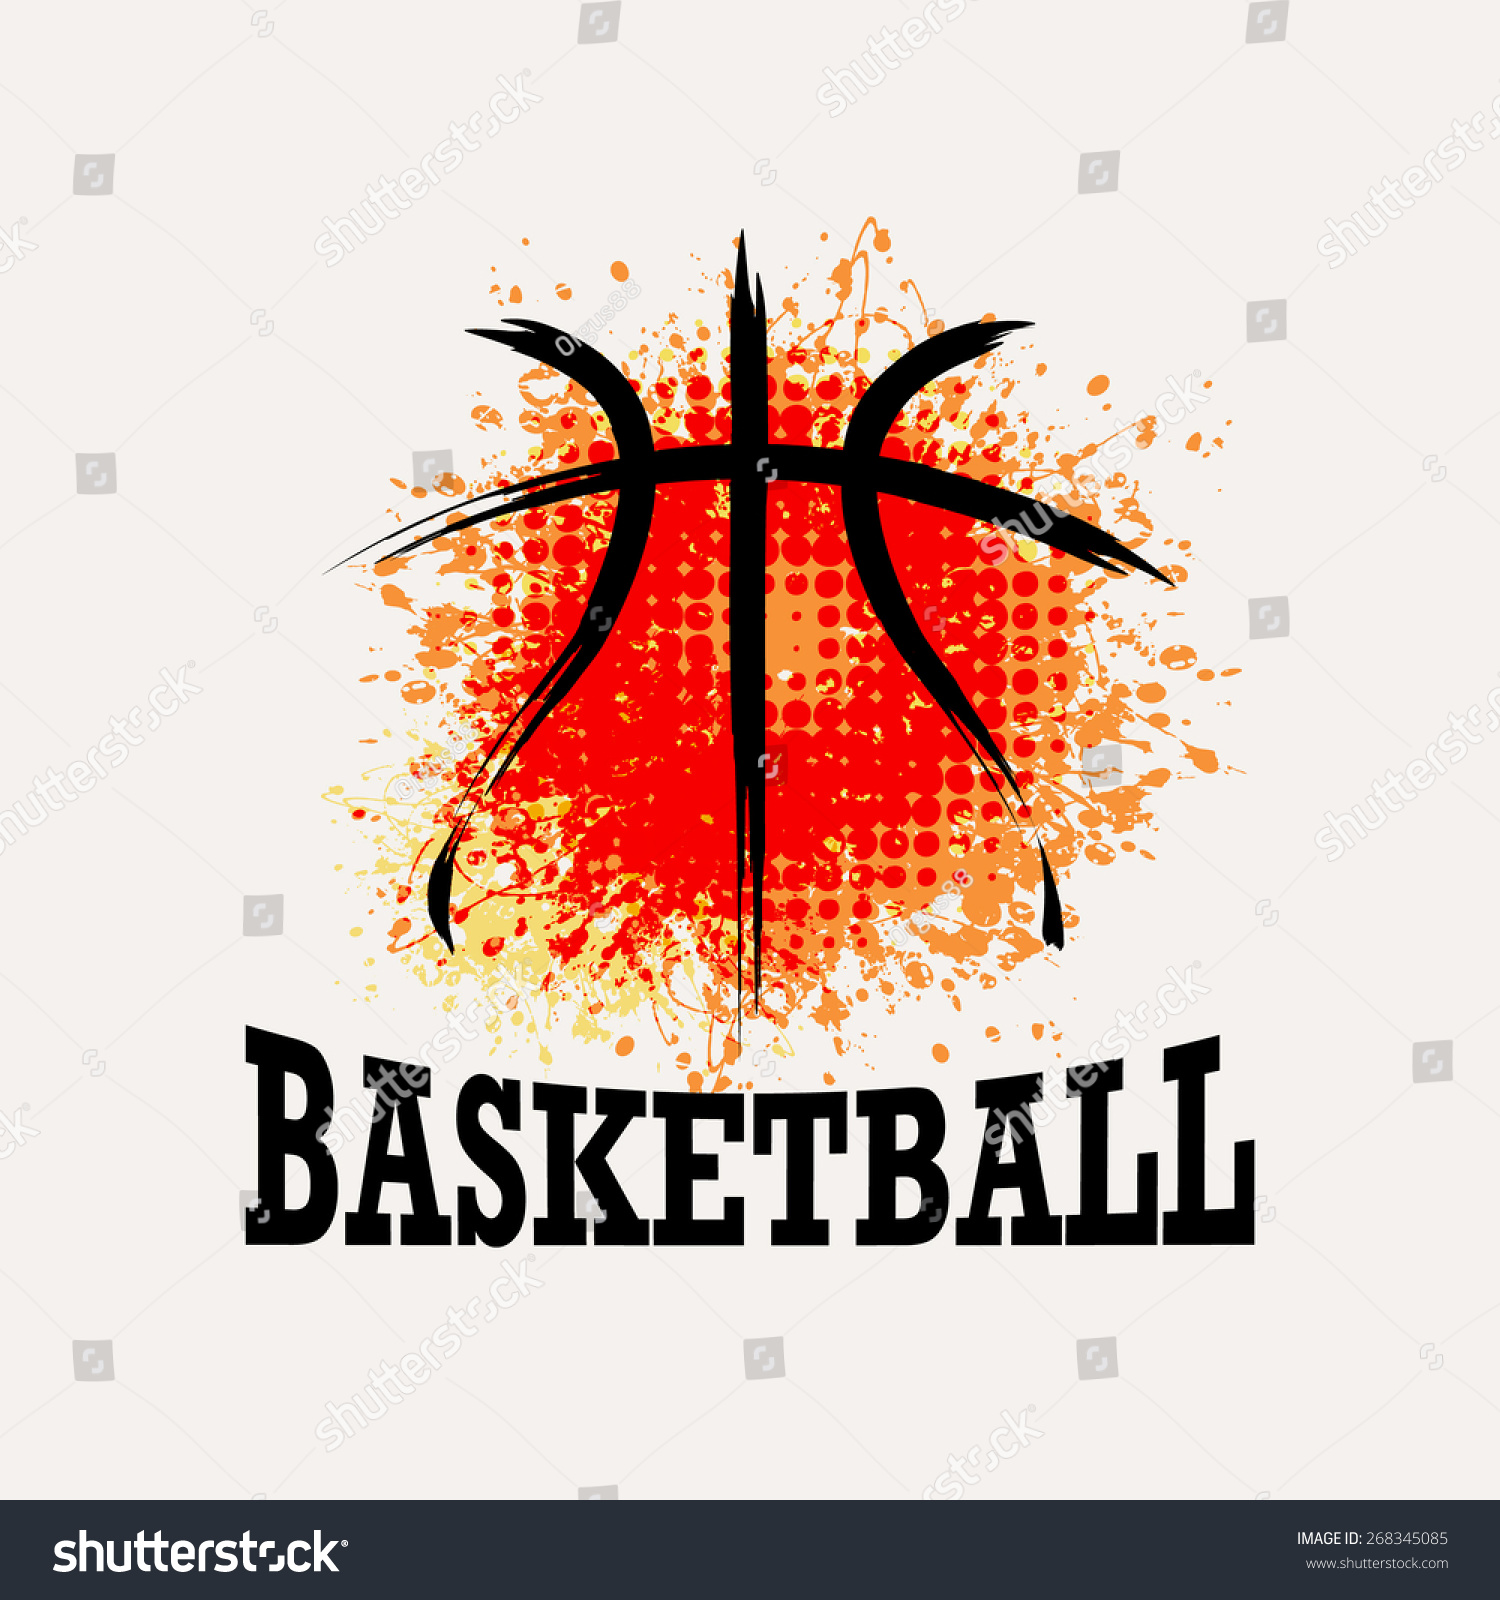 basketball clipart for t shirts - photo #37